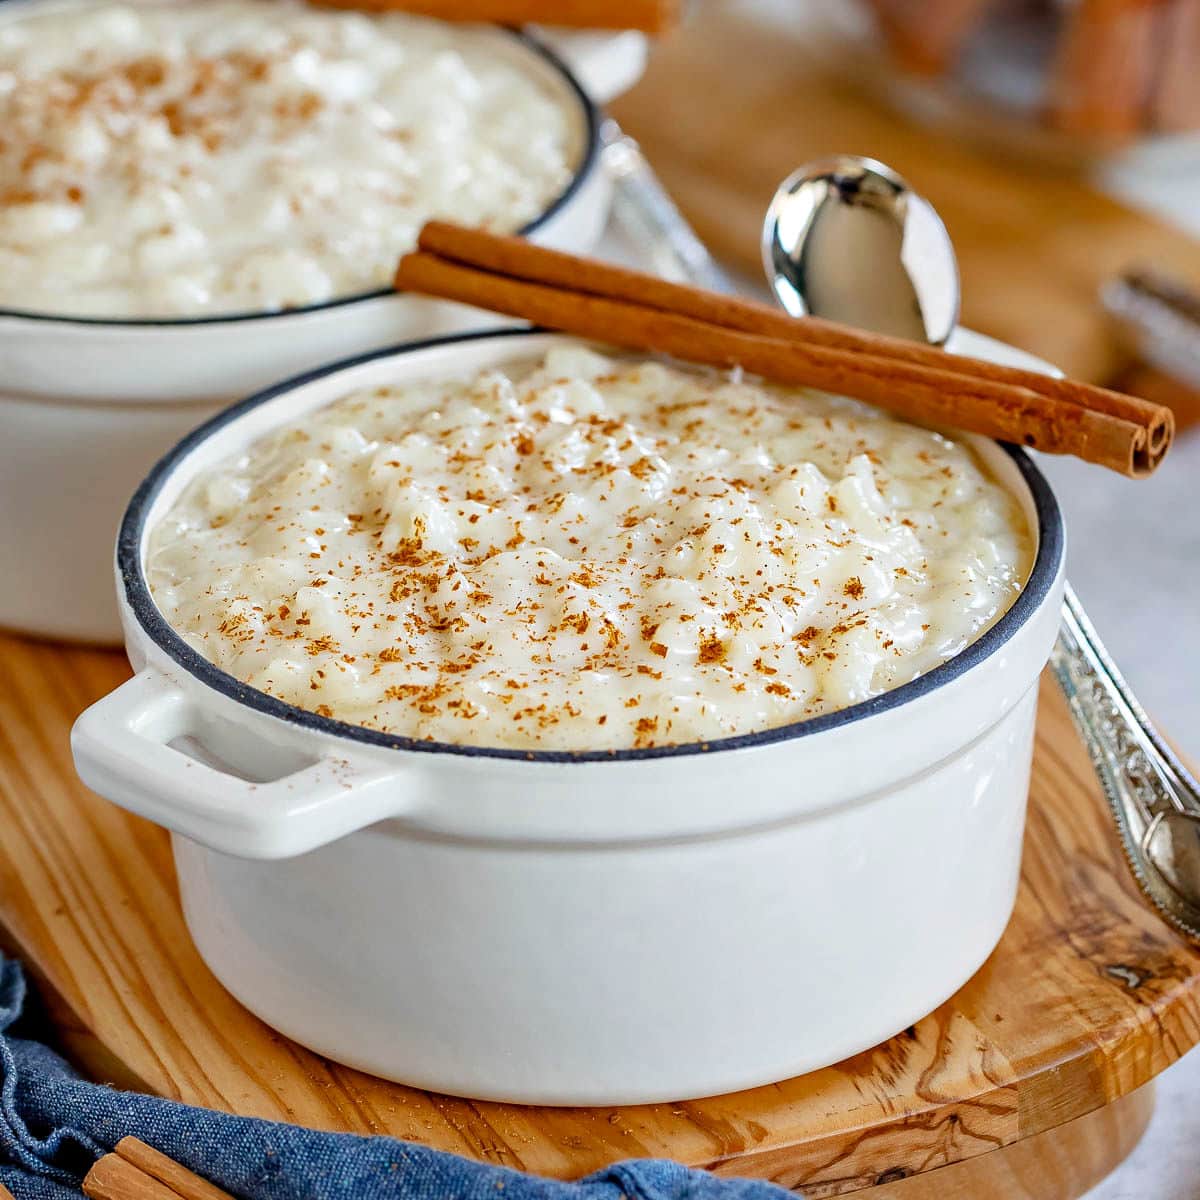 How do you keep rice pudding from getting watery?